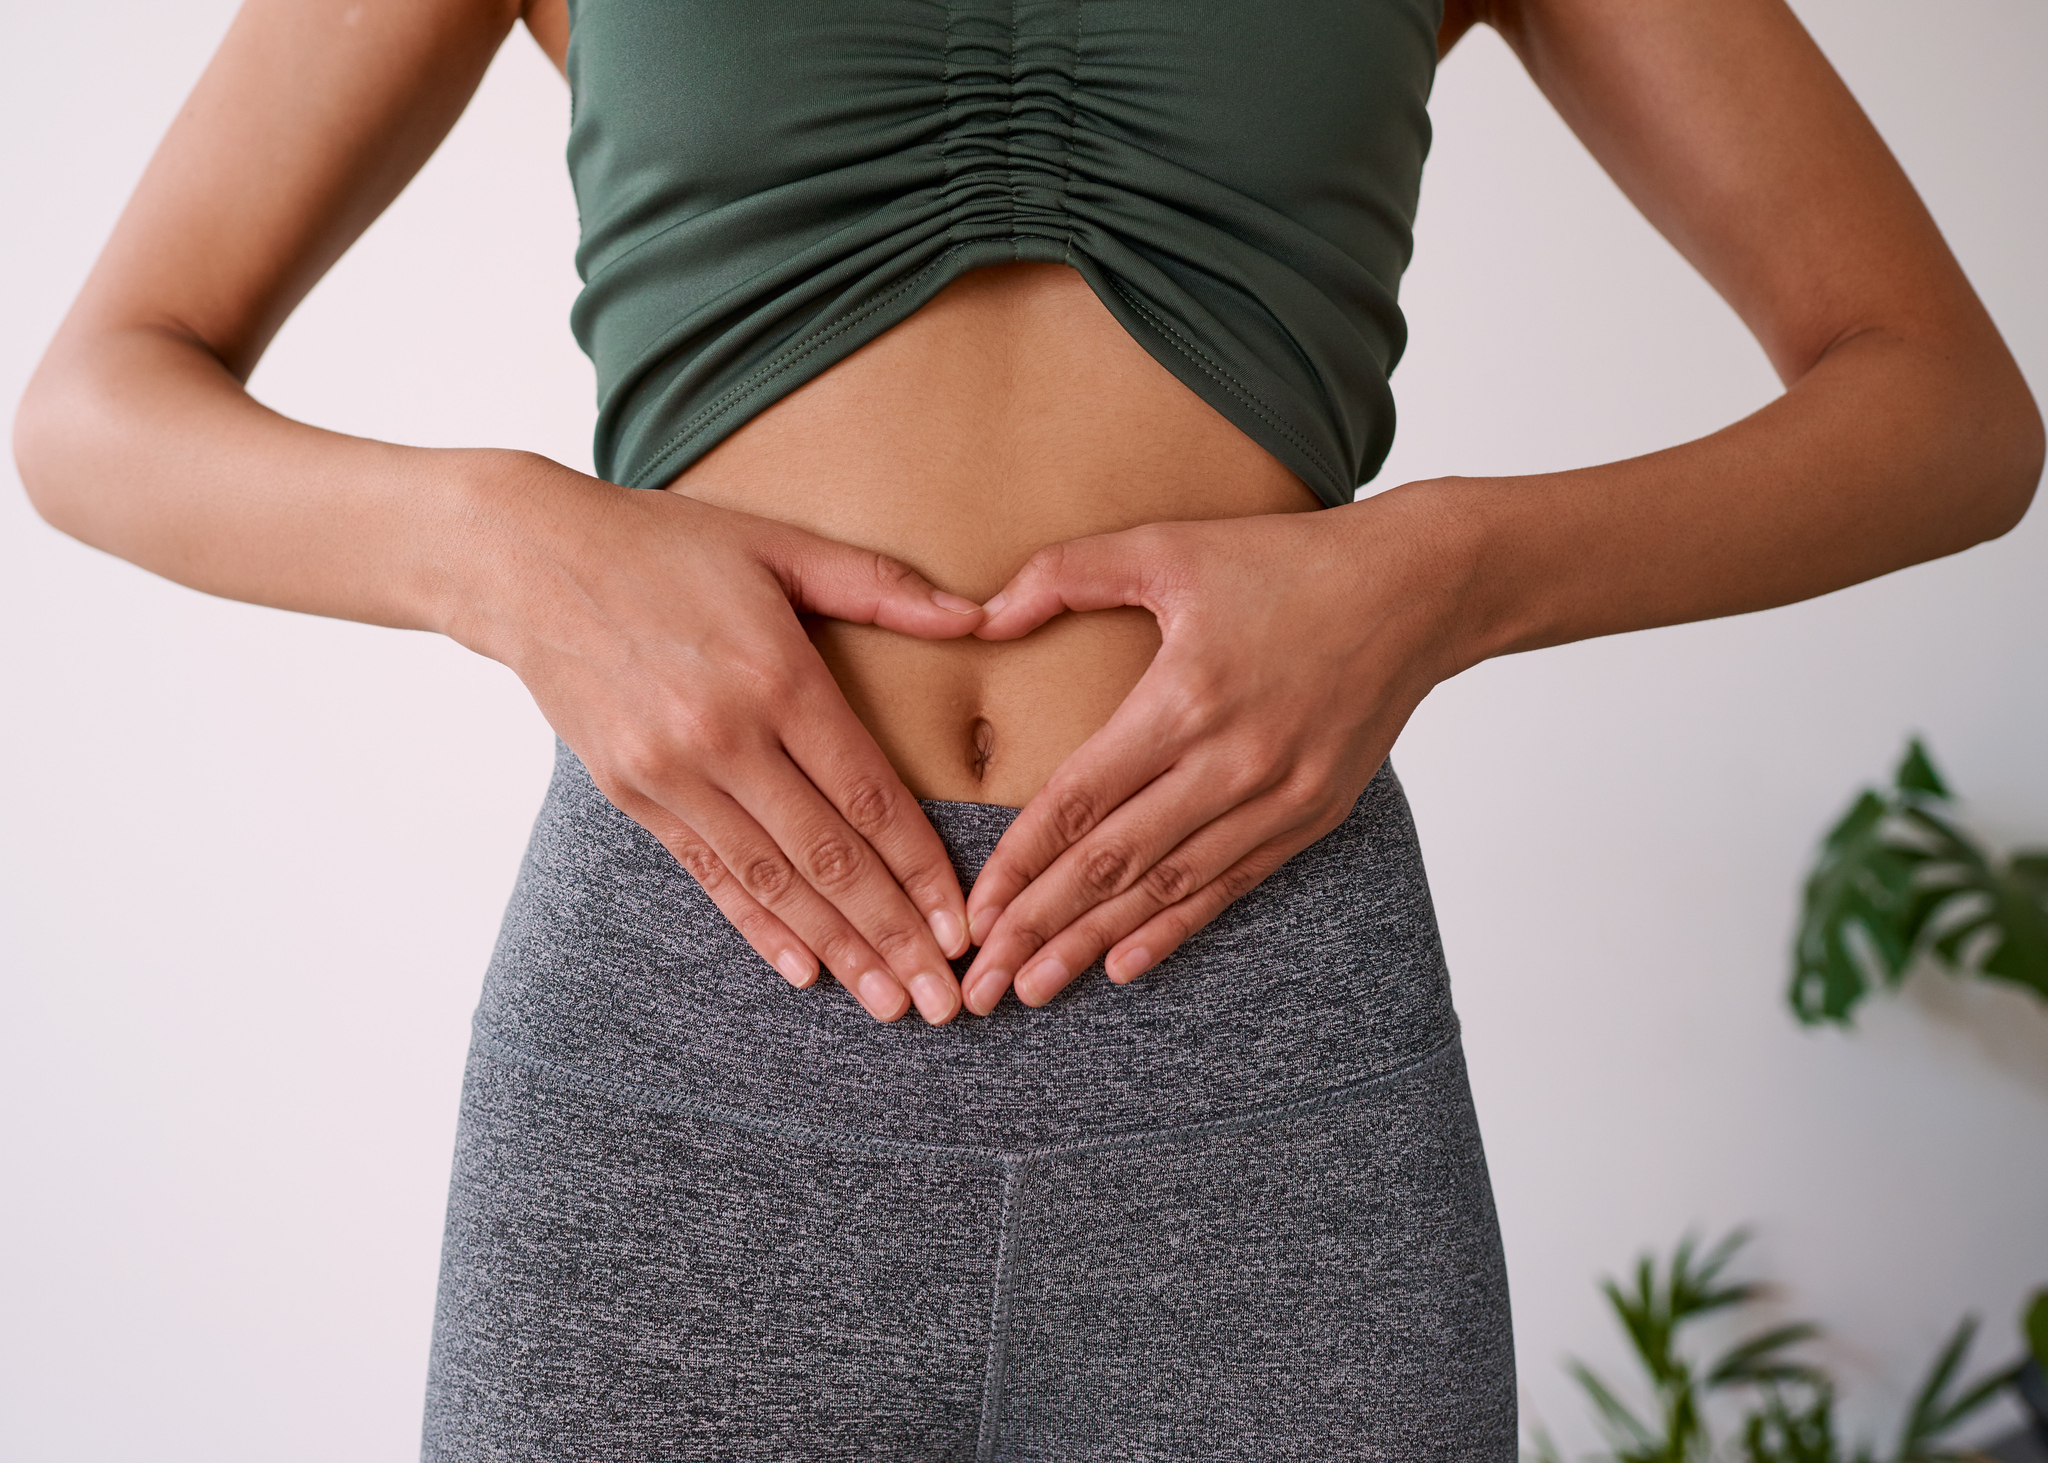 Could a Healthy Lifestyle Save You from Irritable Bowel Diseases?